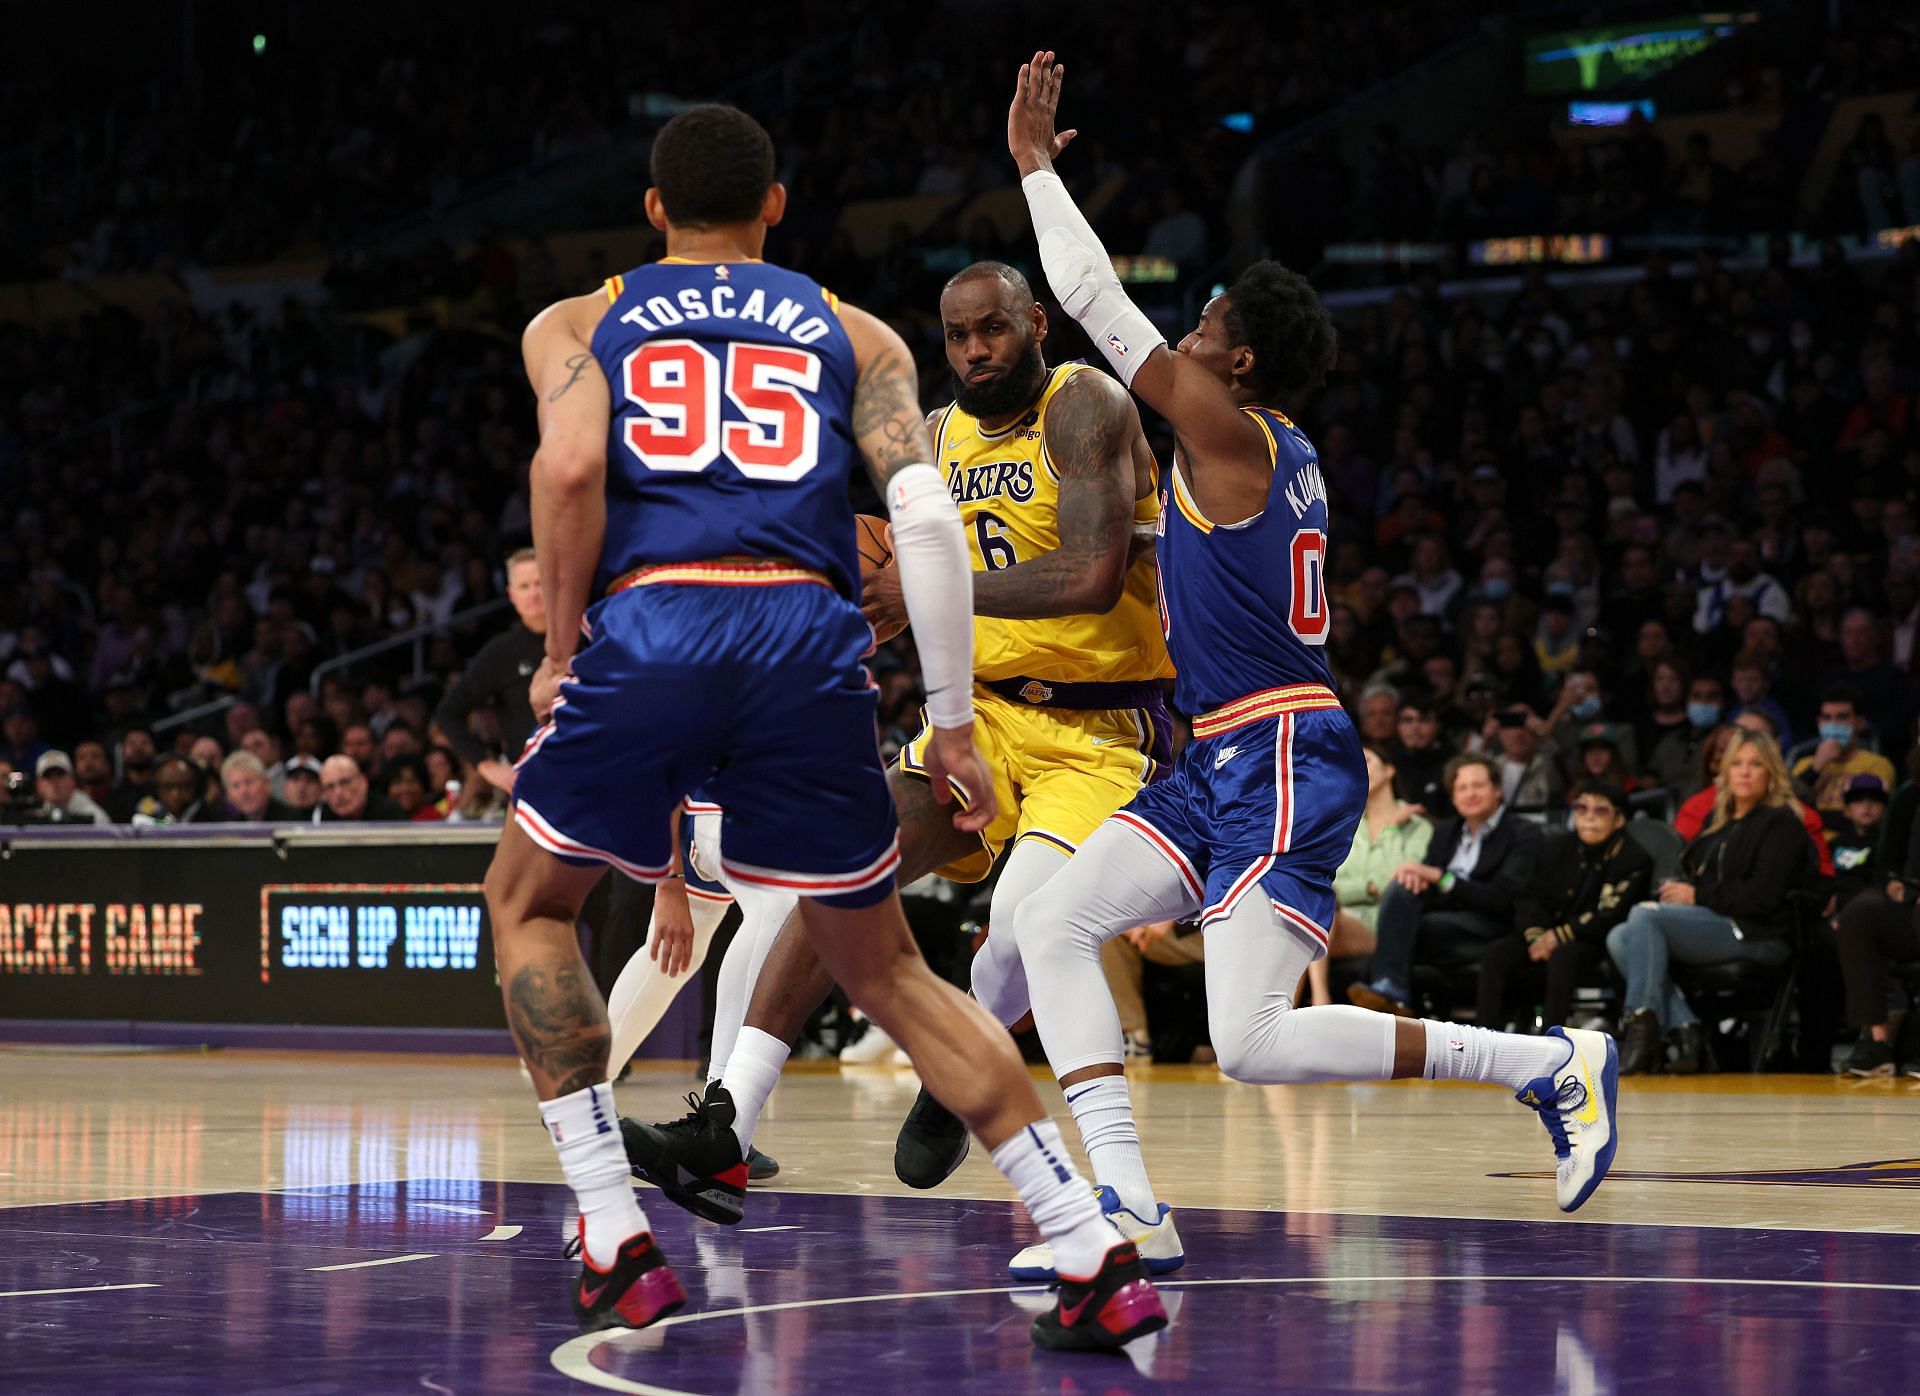 The Golden State Warriors will host the LA Lakers on April 7th